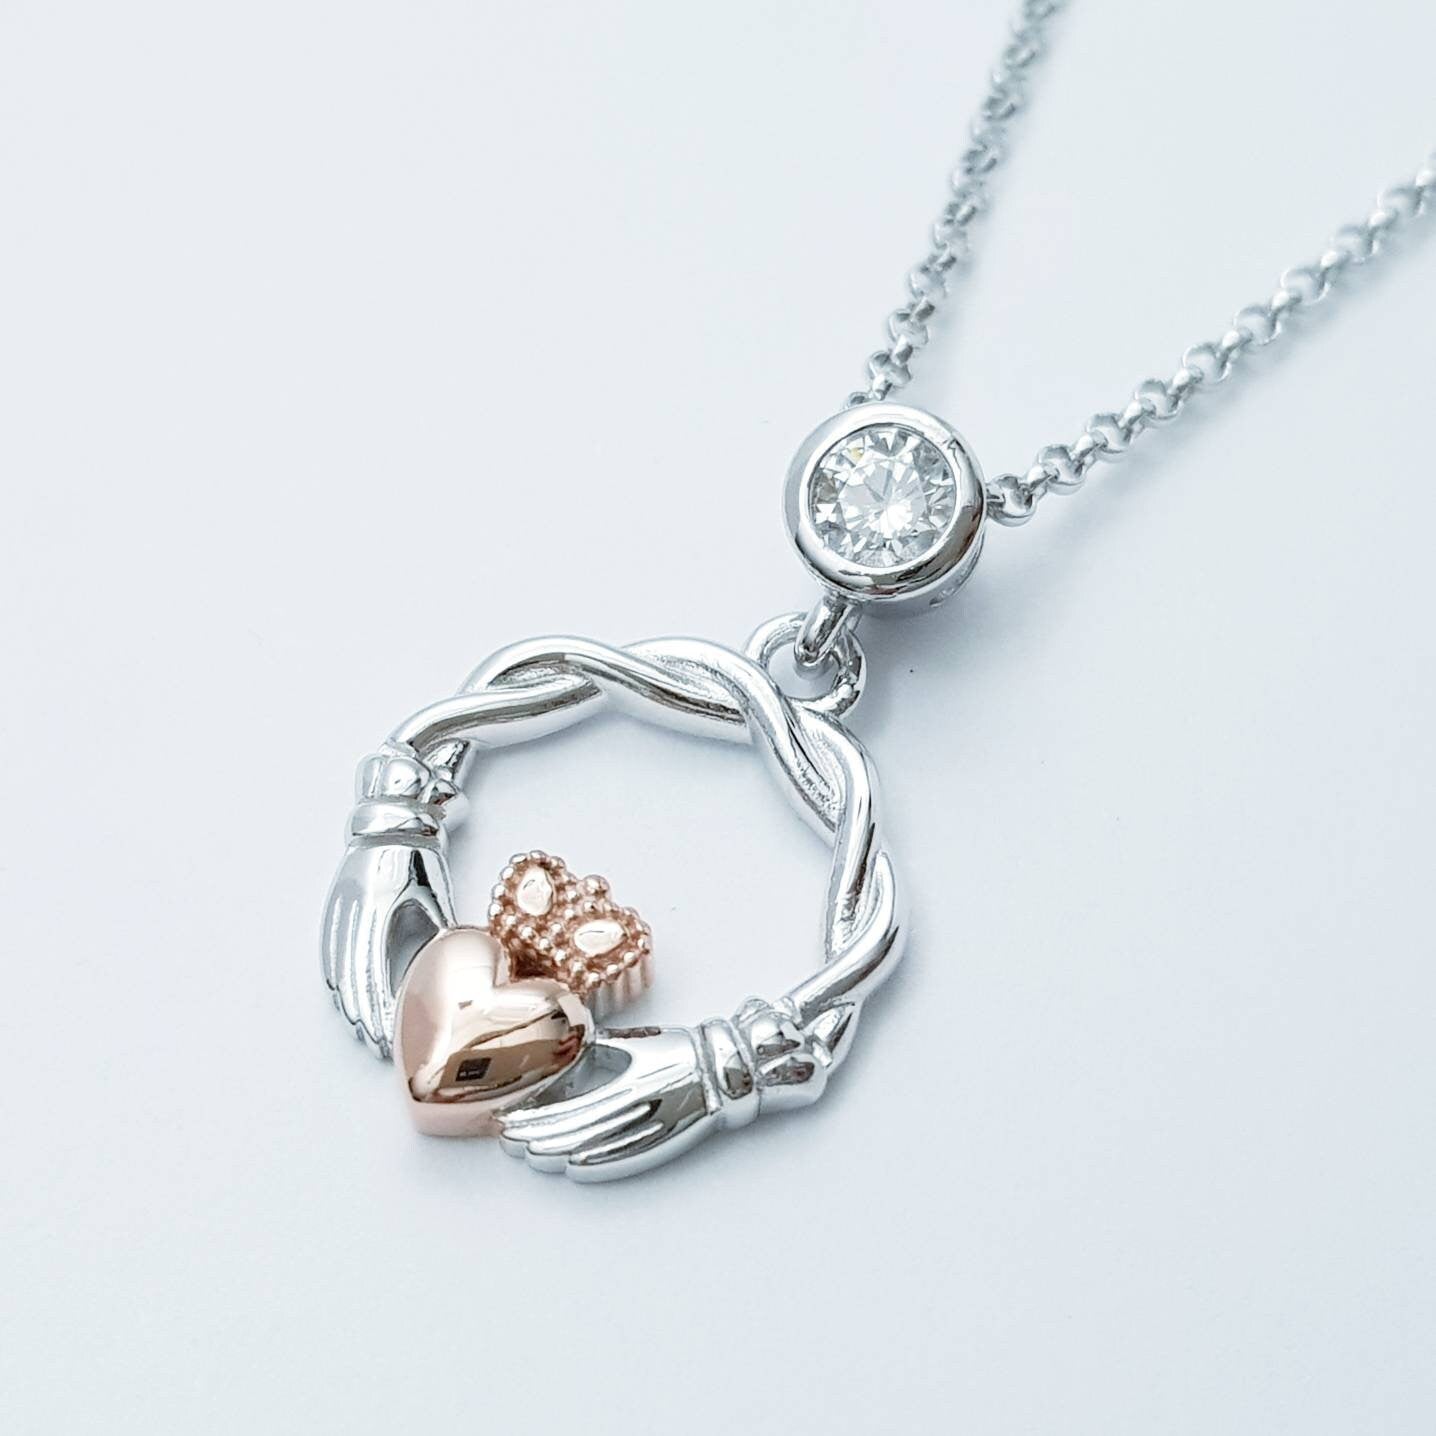 Dainty Sterling Silver claddagh necklace with rose gold plating and intertwined celtic braid.